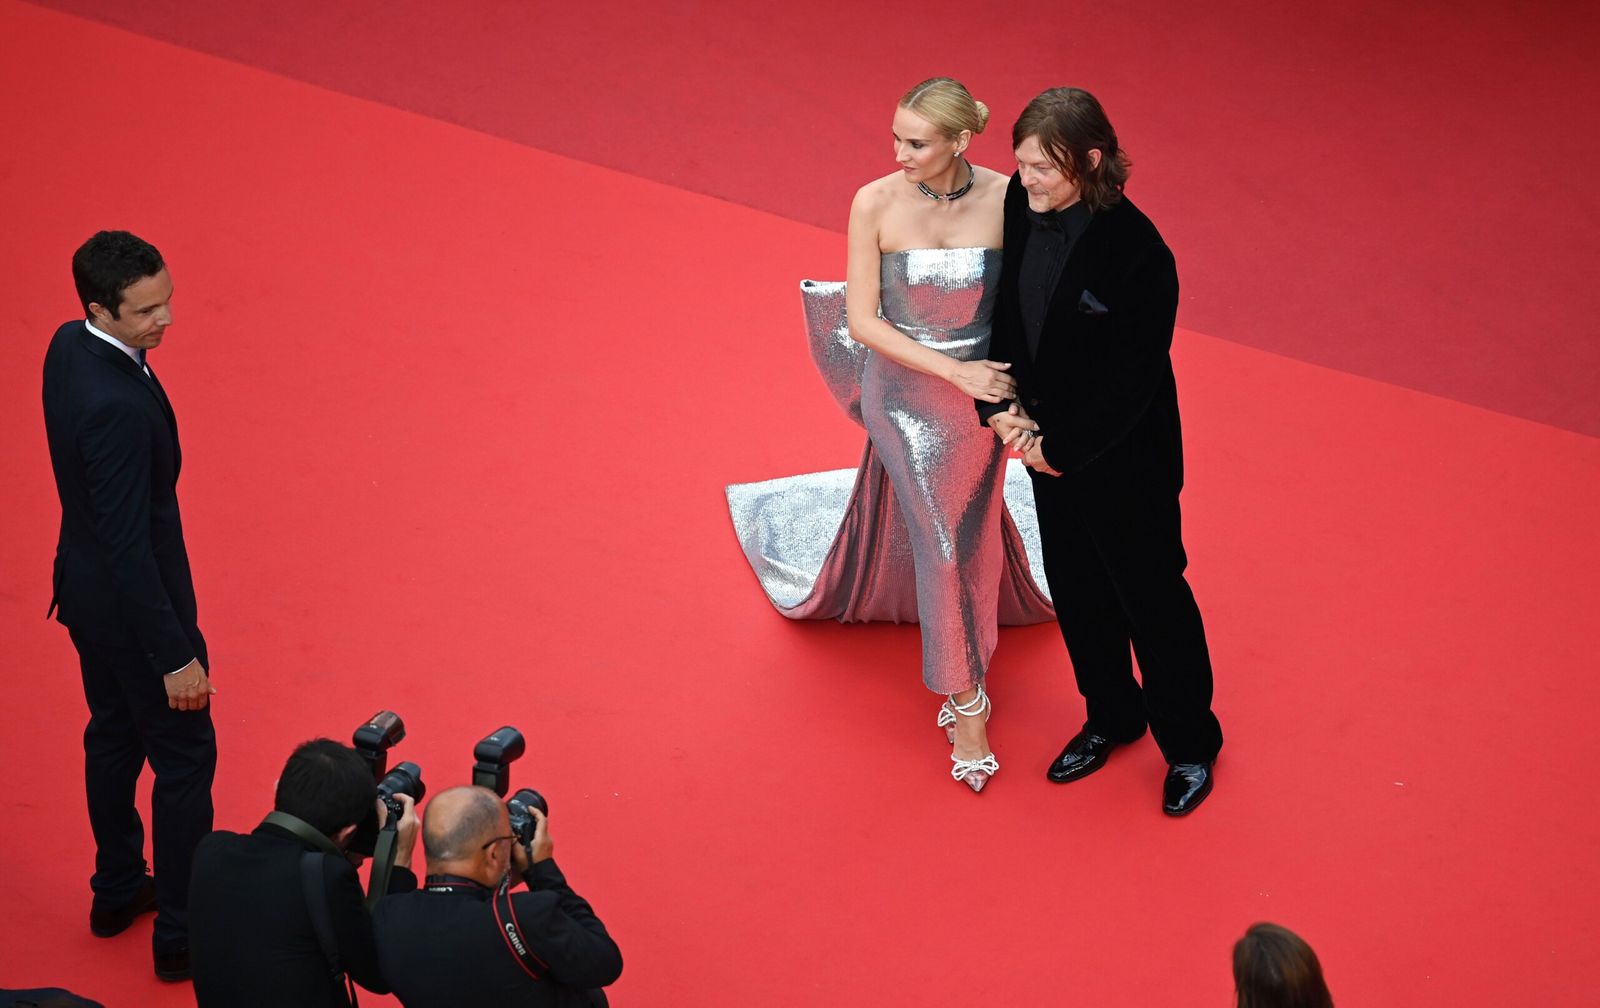 Diane Kruger Wore AMI To The Cannes Film Festival Closing Ceremony